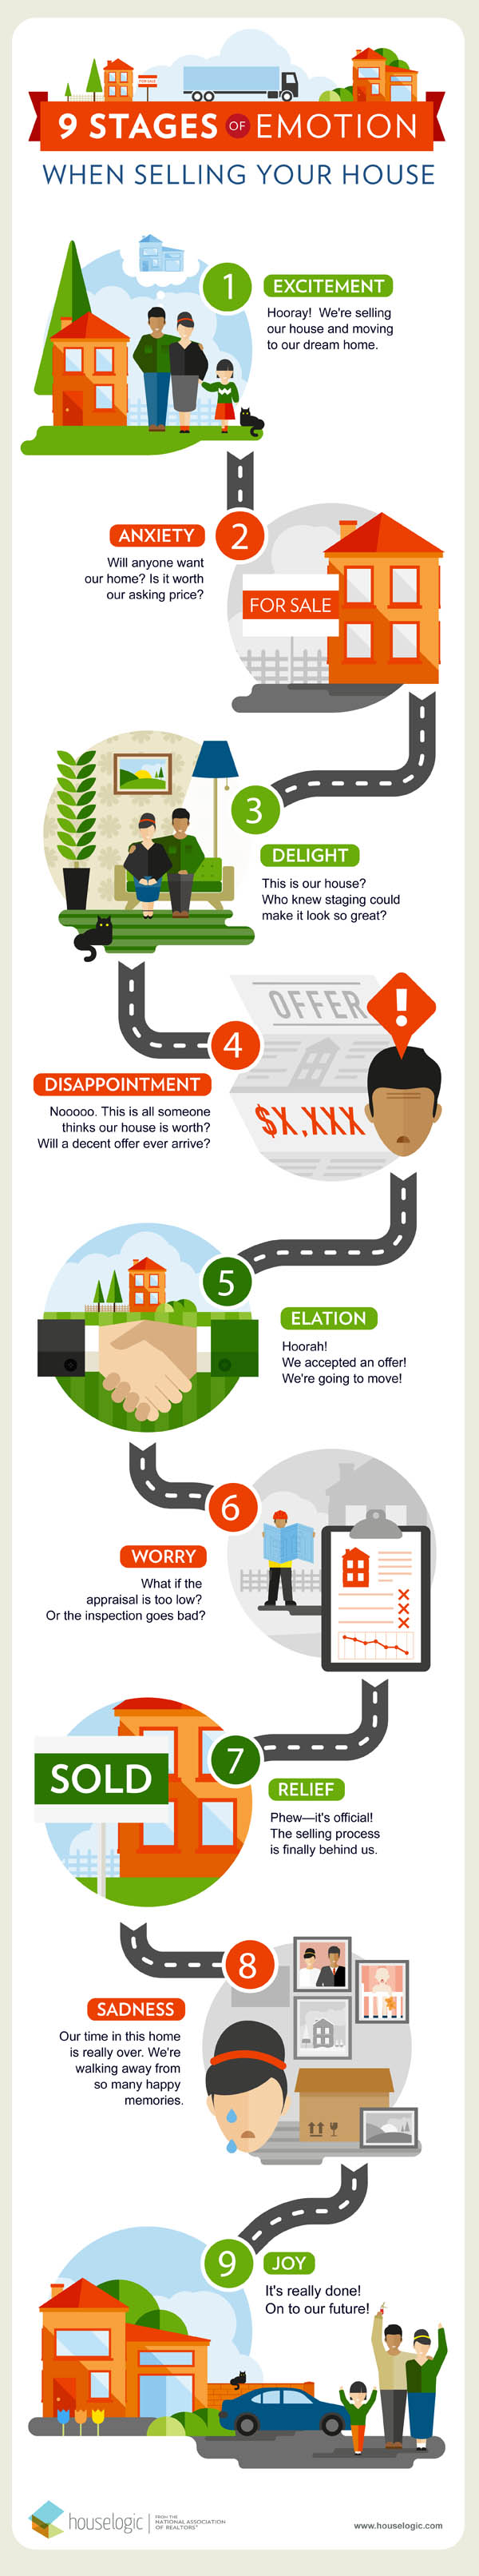 Stages of Emotion for First Time Home Sellers